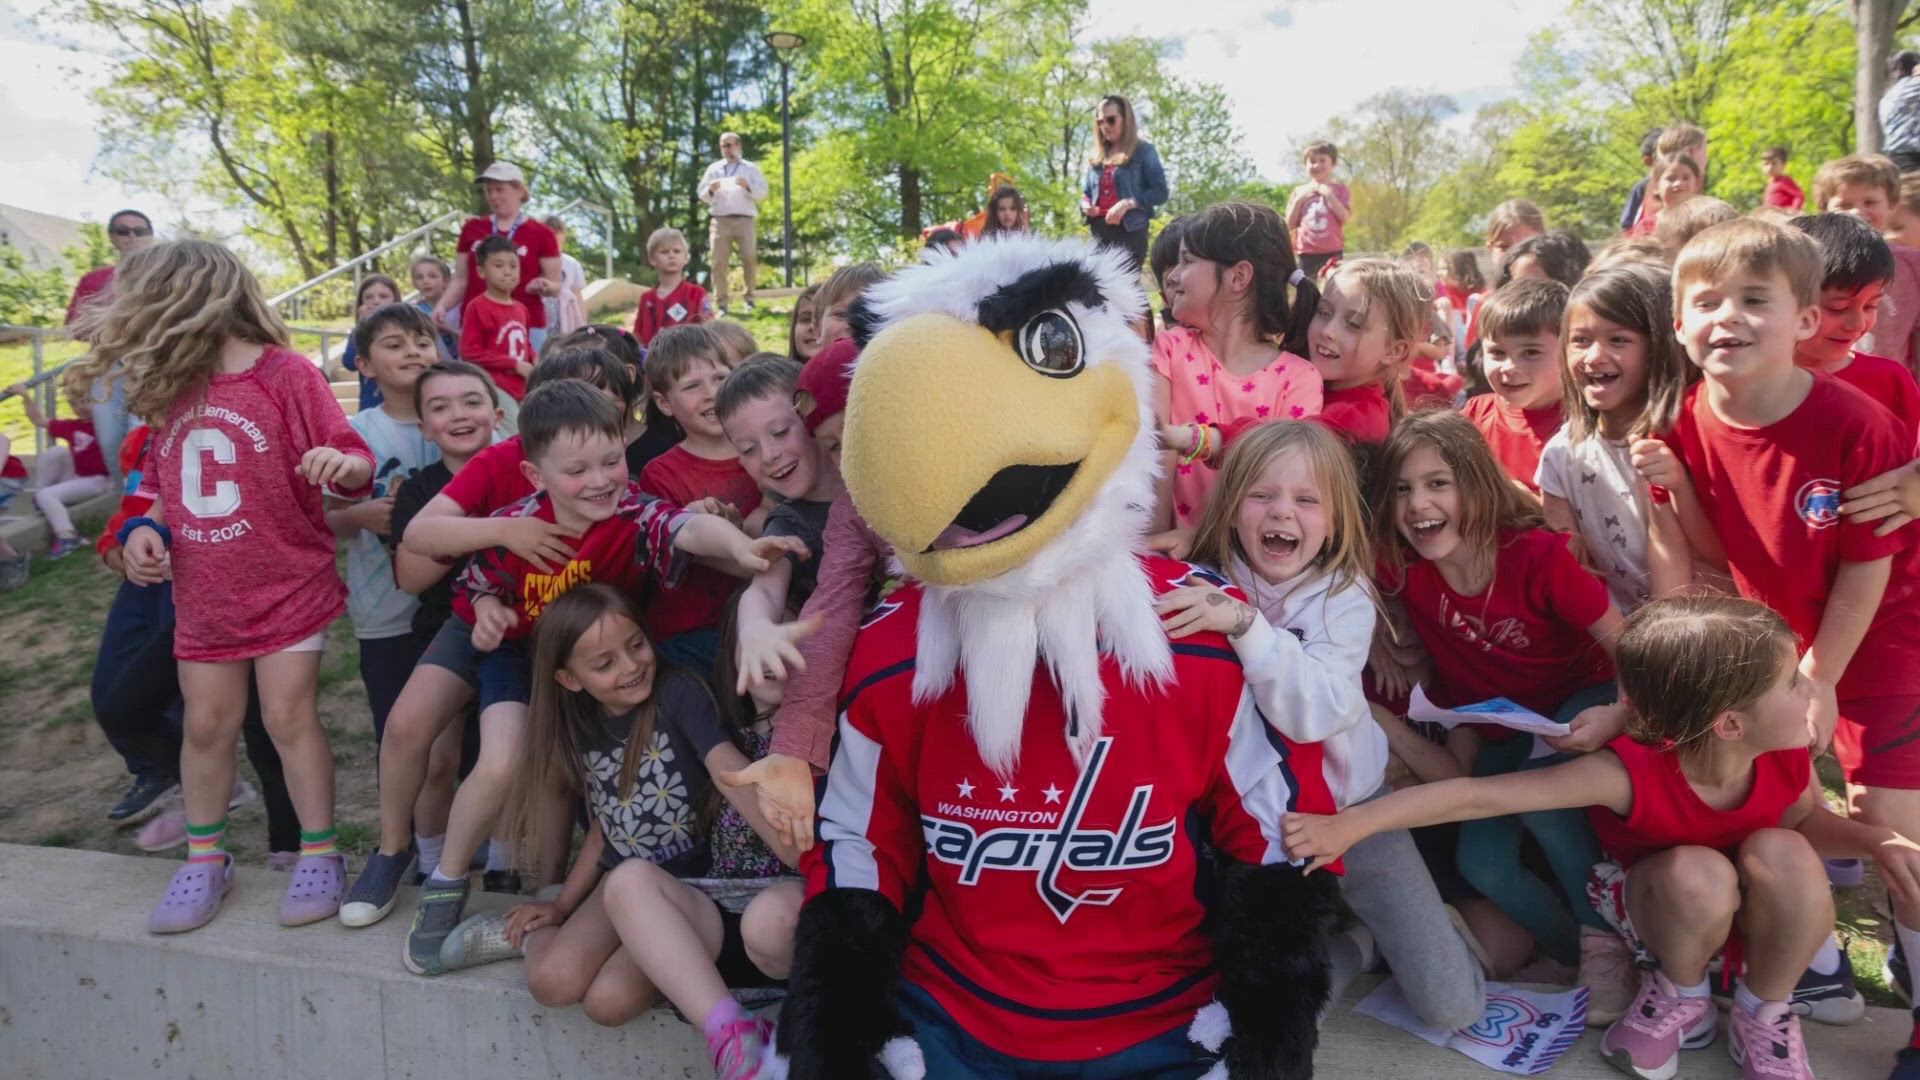 The clinic served as a pep rally of sorts at the Caps look to continue their playoff run.